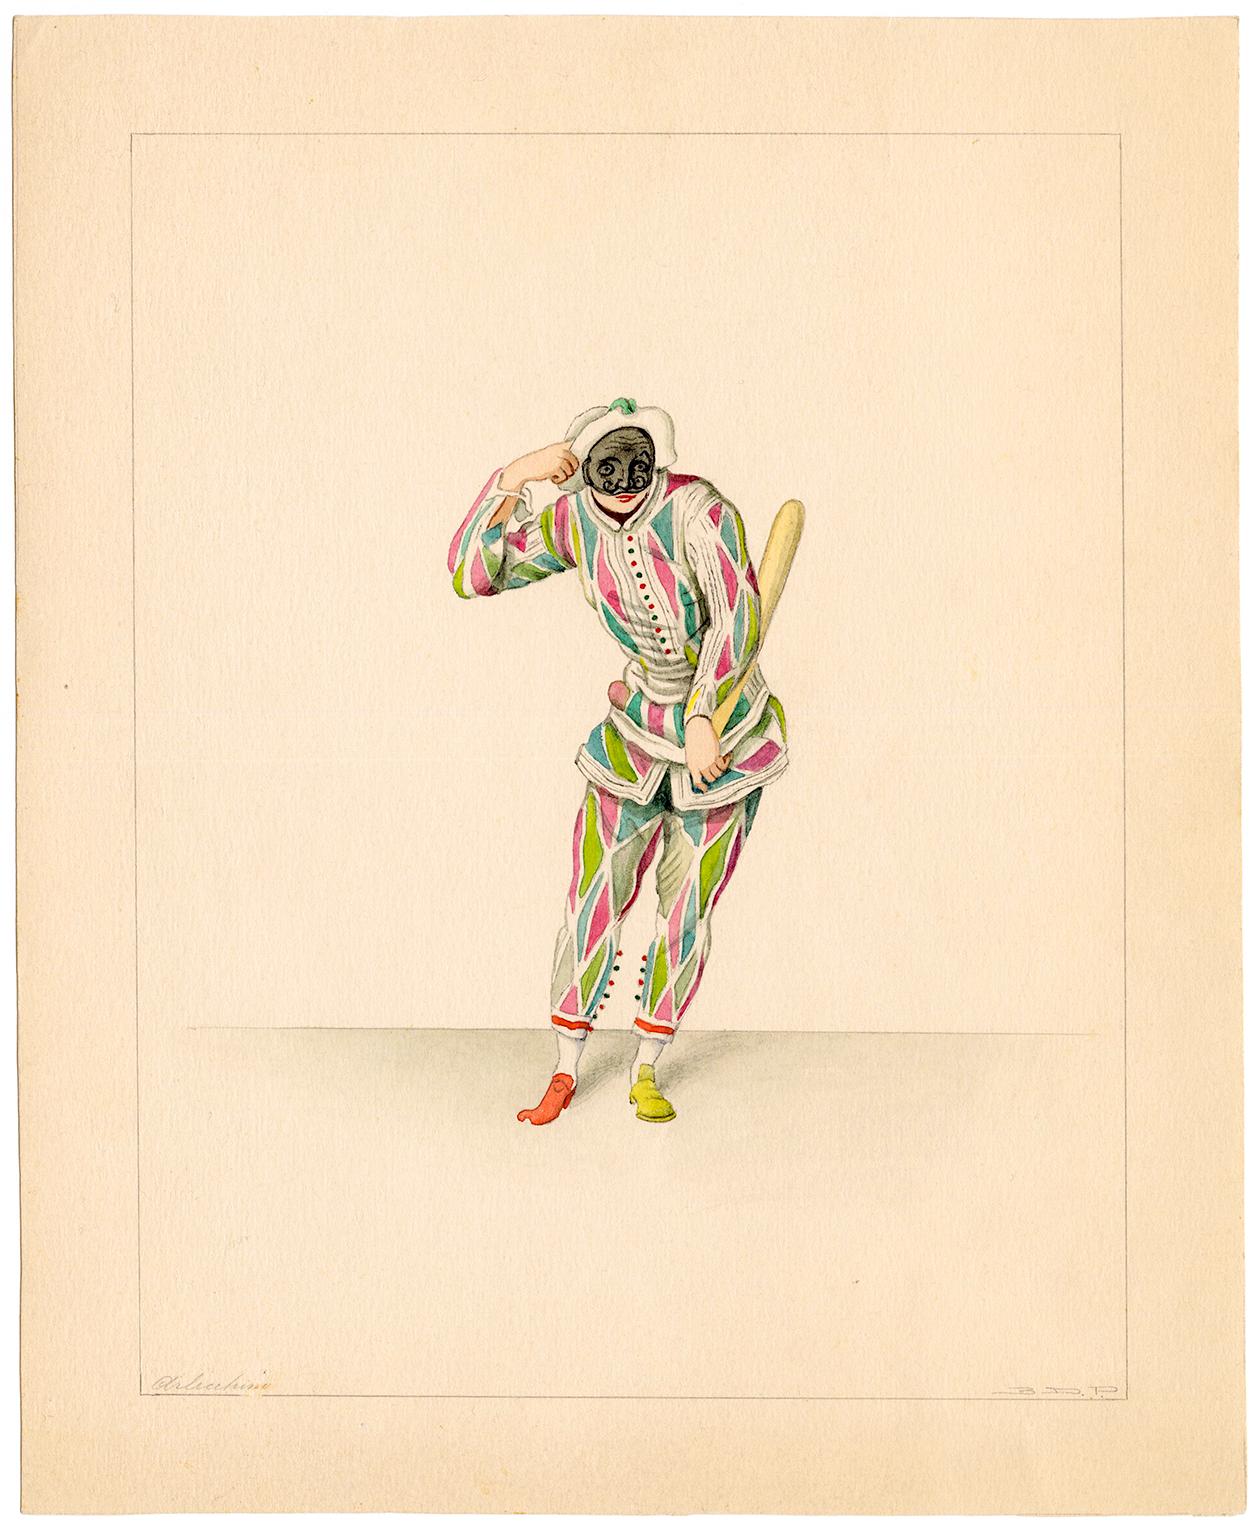 Unidentified artist, 'Commedia dell’arte' – four character studies (Arlecchino, Pantalone, Pantalone giovane, Tartaglia), watercolor and pencil, c. 1920s. Initialed '3 D. P.' beneath the figures, lower right. Finely rendered watercolors, with fresh,